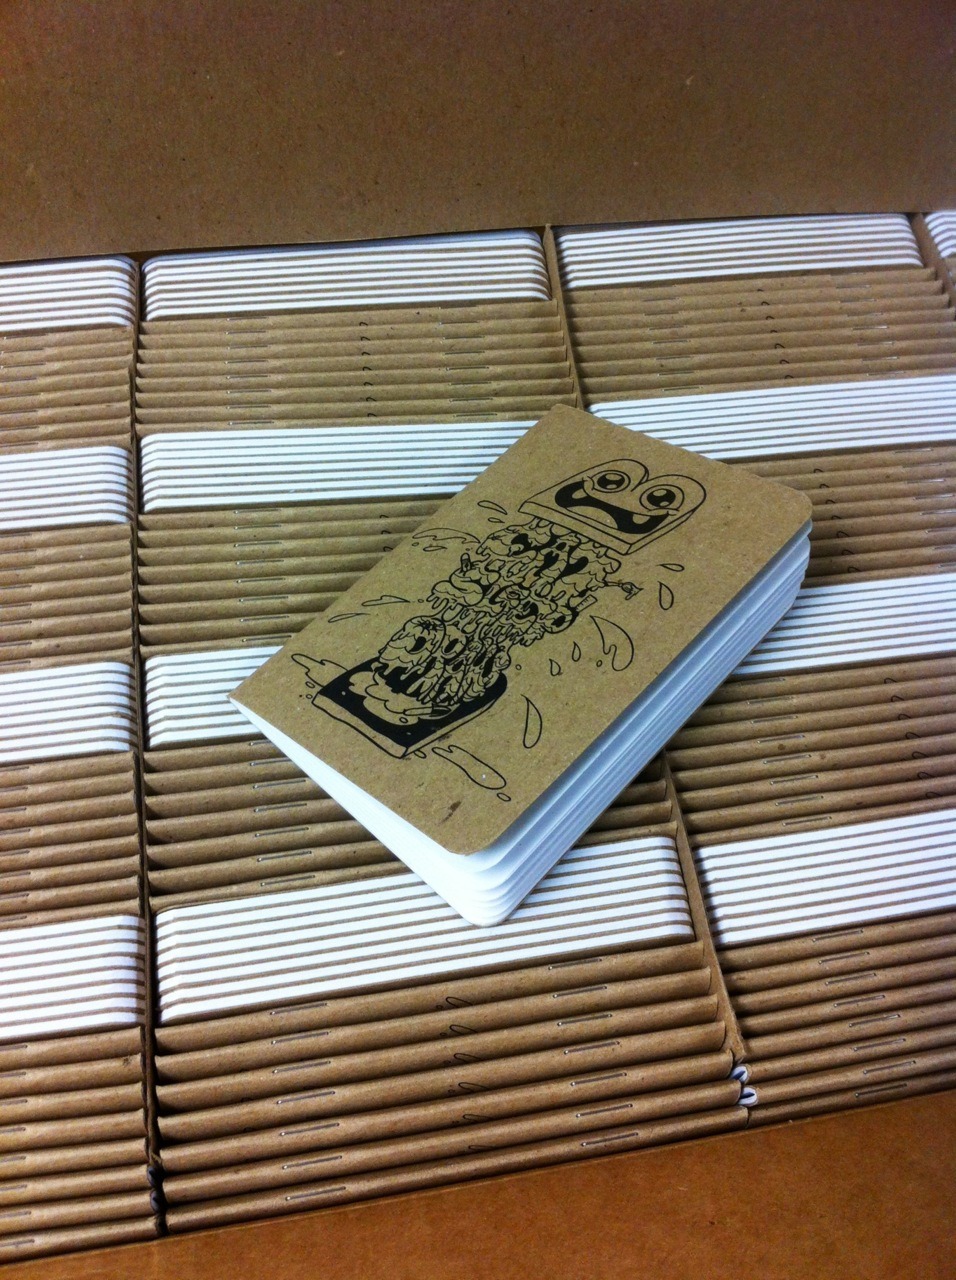 EatSleepDraw Limited edition sketchbooks. They go on sale next week. Make sure to get on our mailing list to find out when they drop.